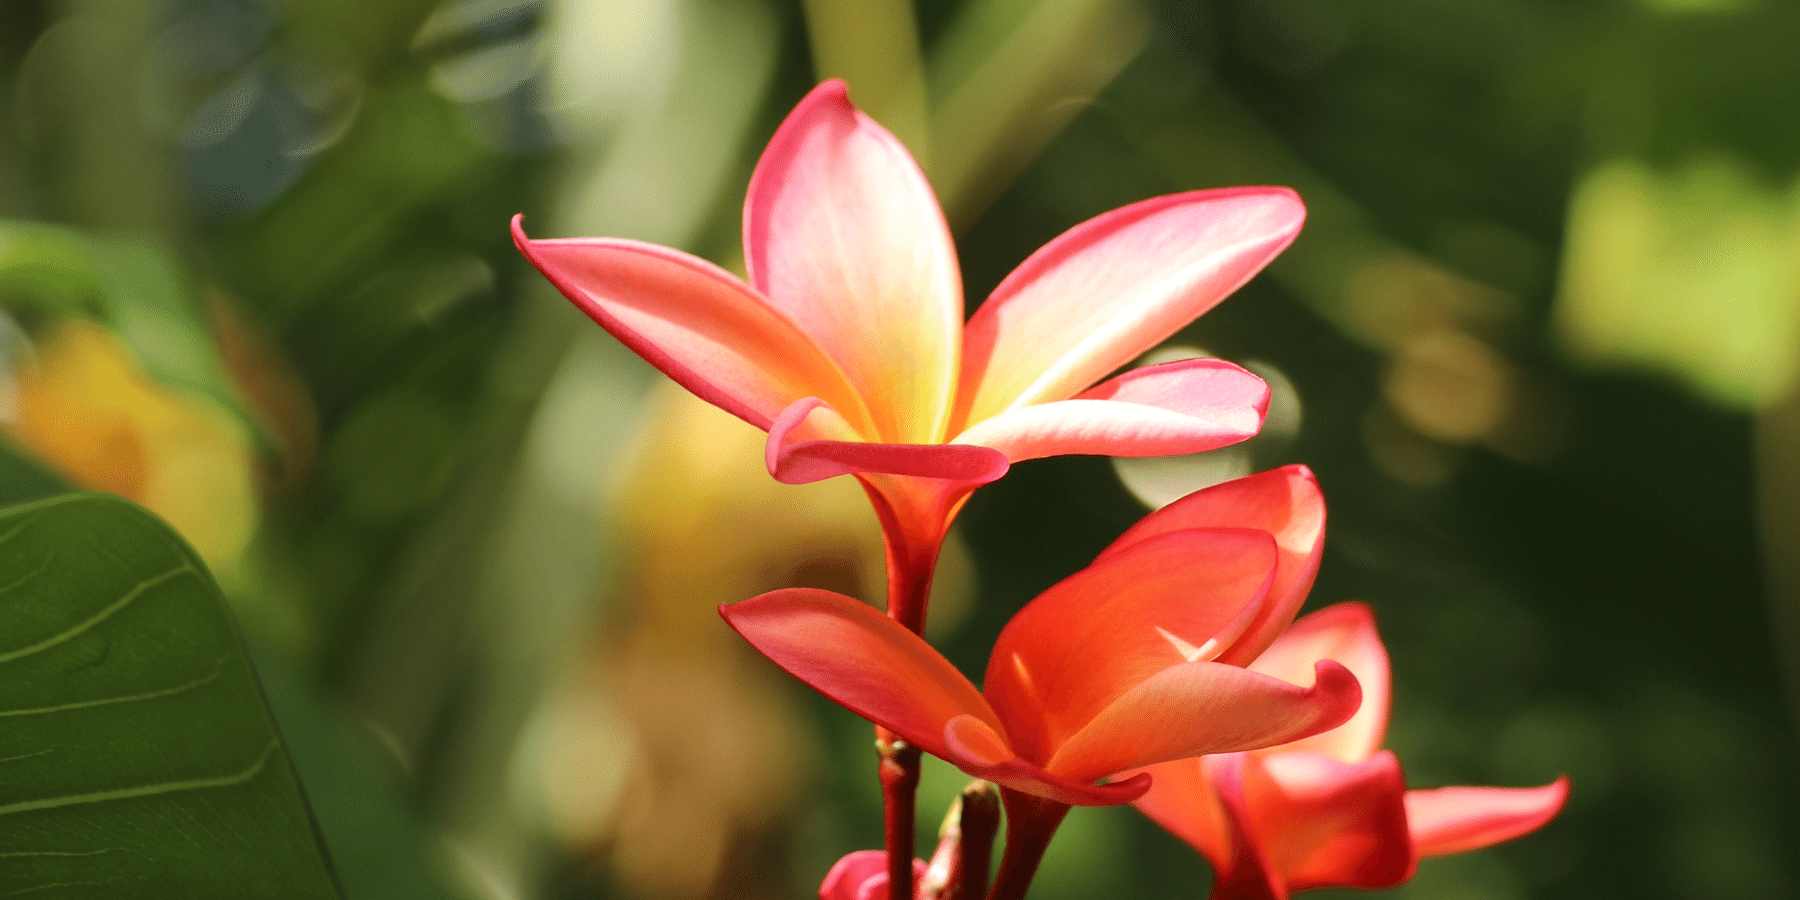 Bright red jungle flower opens up its petals into the sunlight, Green leaves can be seen behind.